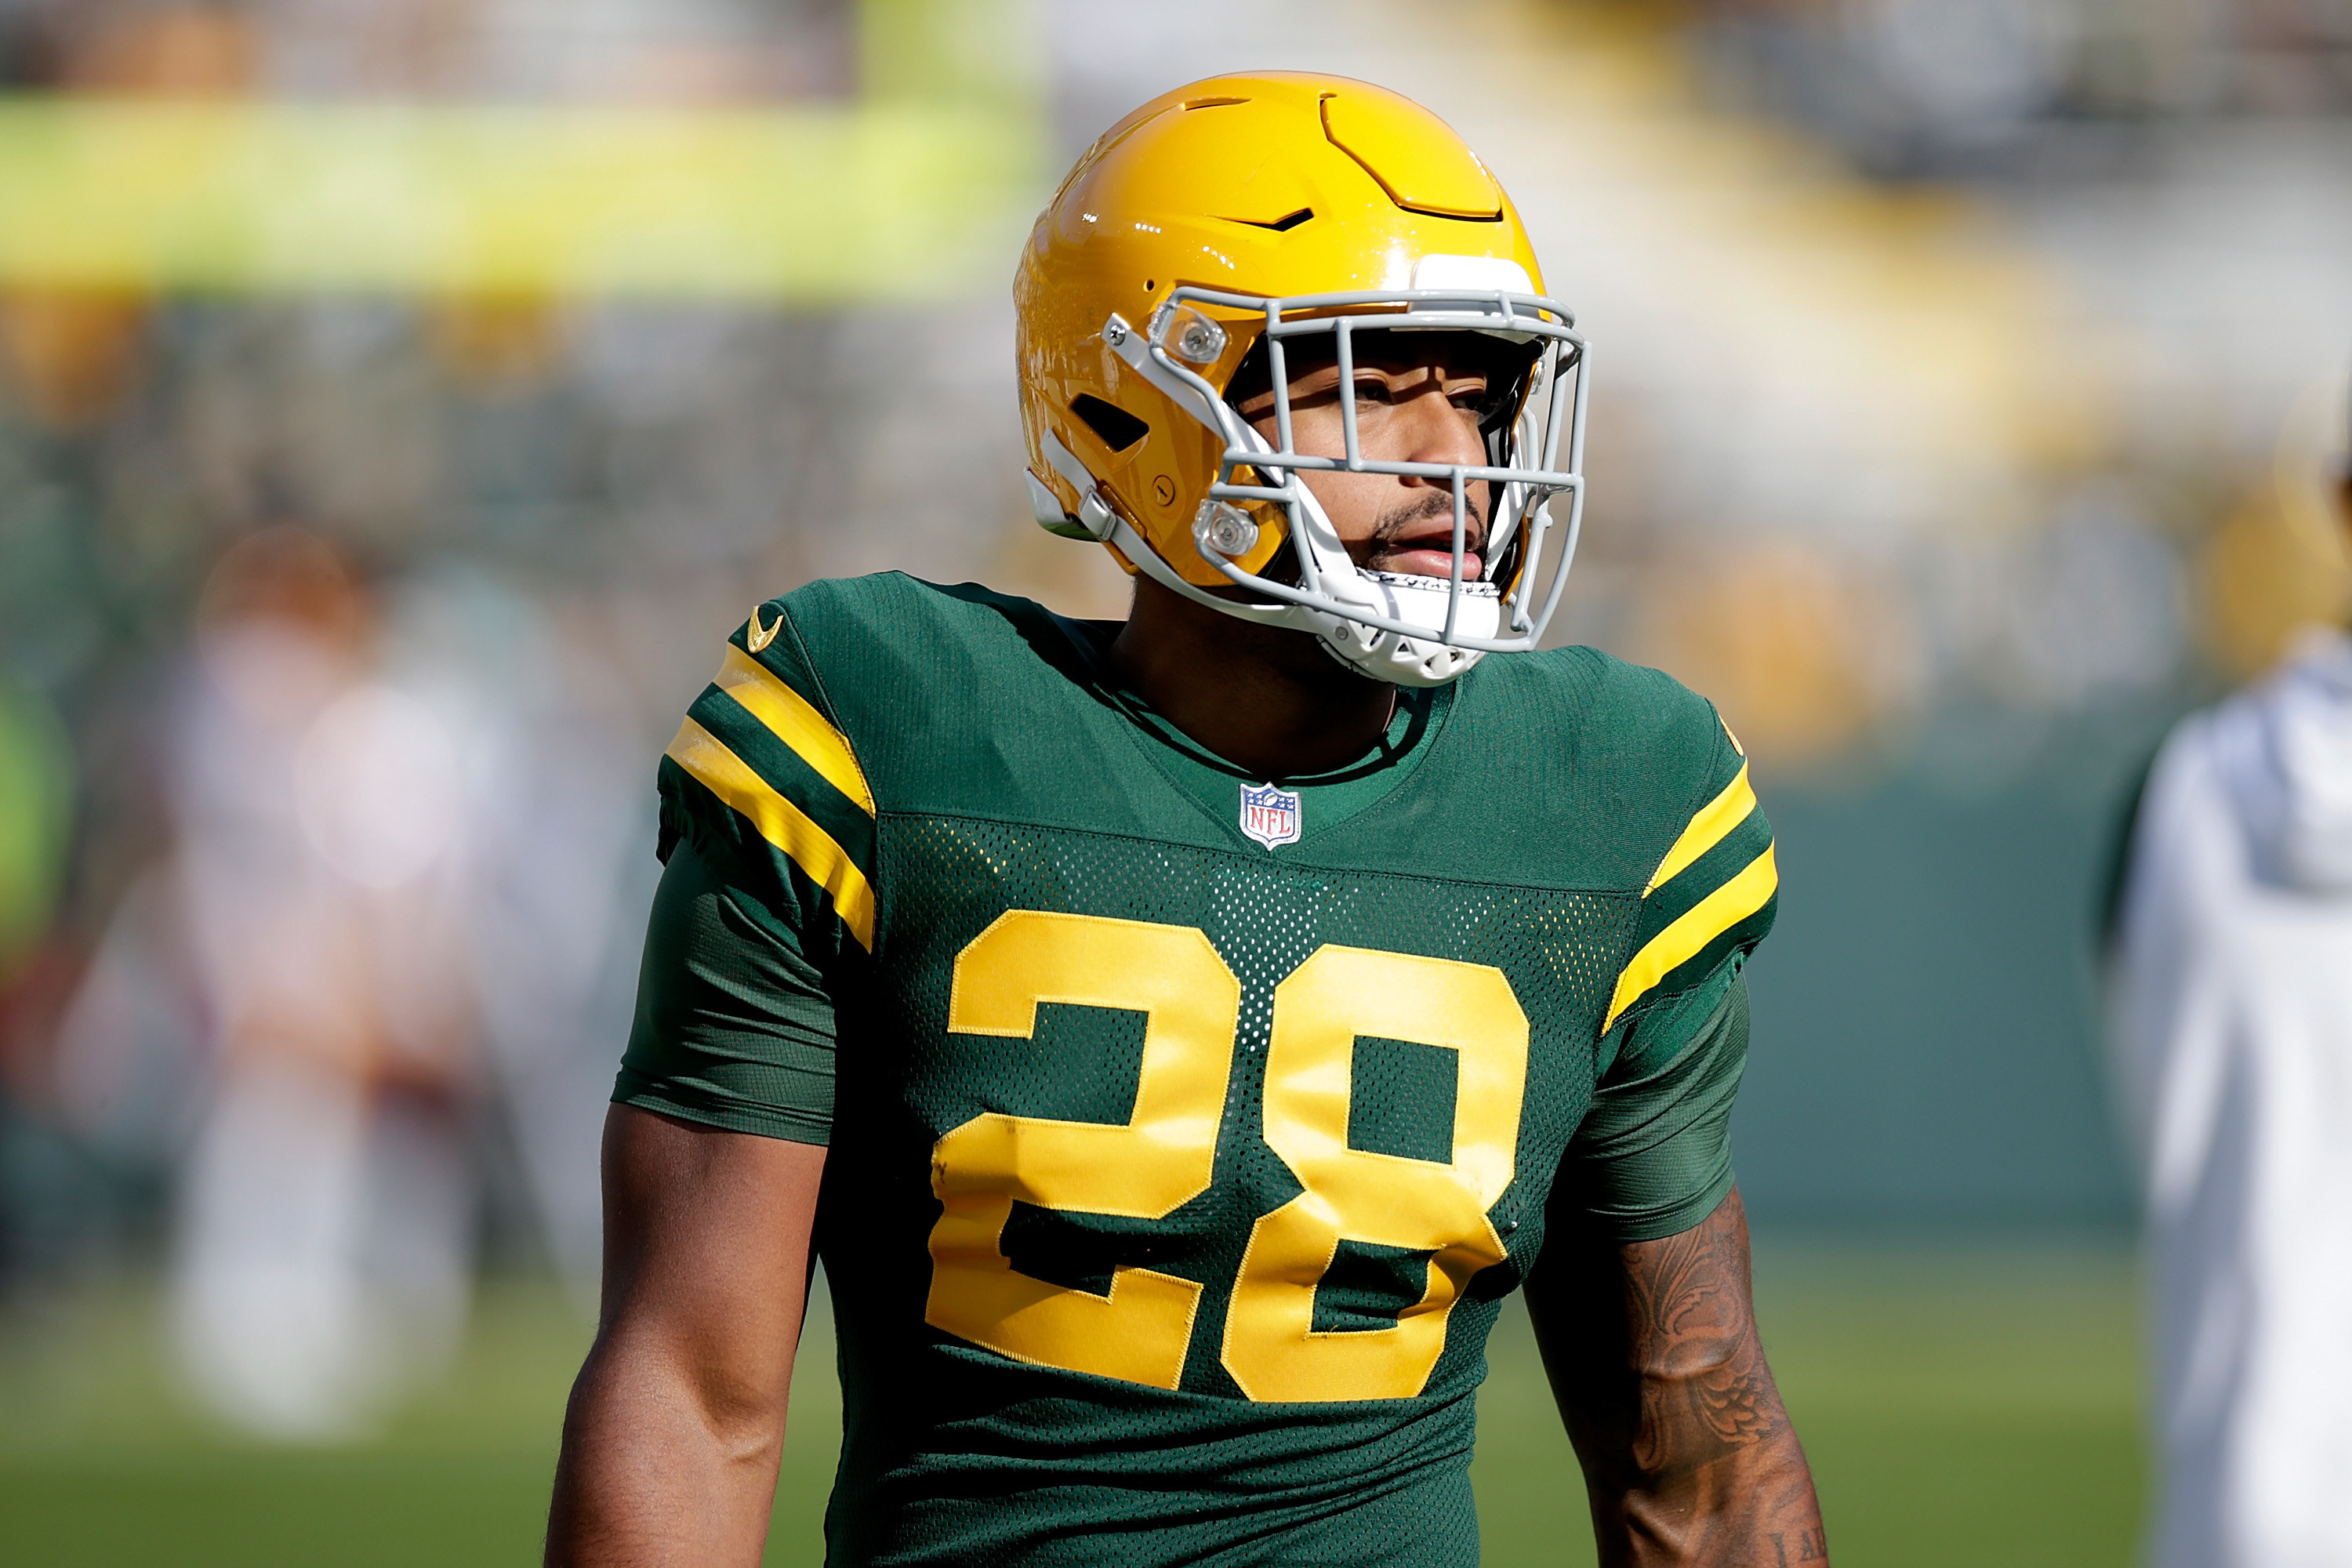 AJ Dillon in a green and yellow Packers uniform